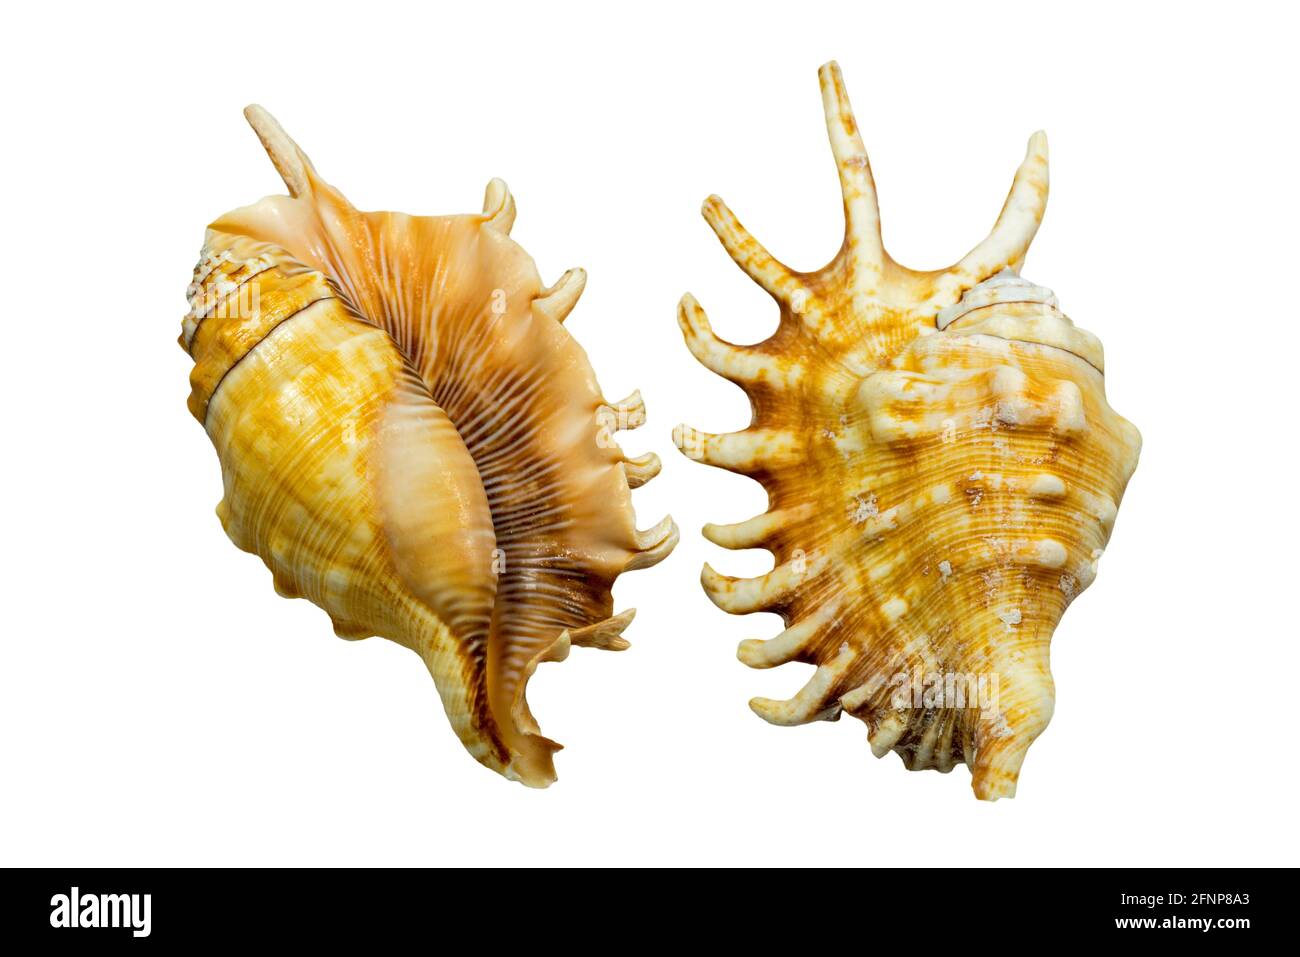 Millipede spider conchs (Lambis millepeda), sea snail, marine gastropod mollusk native to the Indian Ocean off Madagascar and Southwest Pacific Ocean Stock Photo